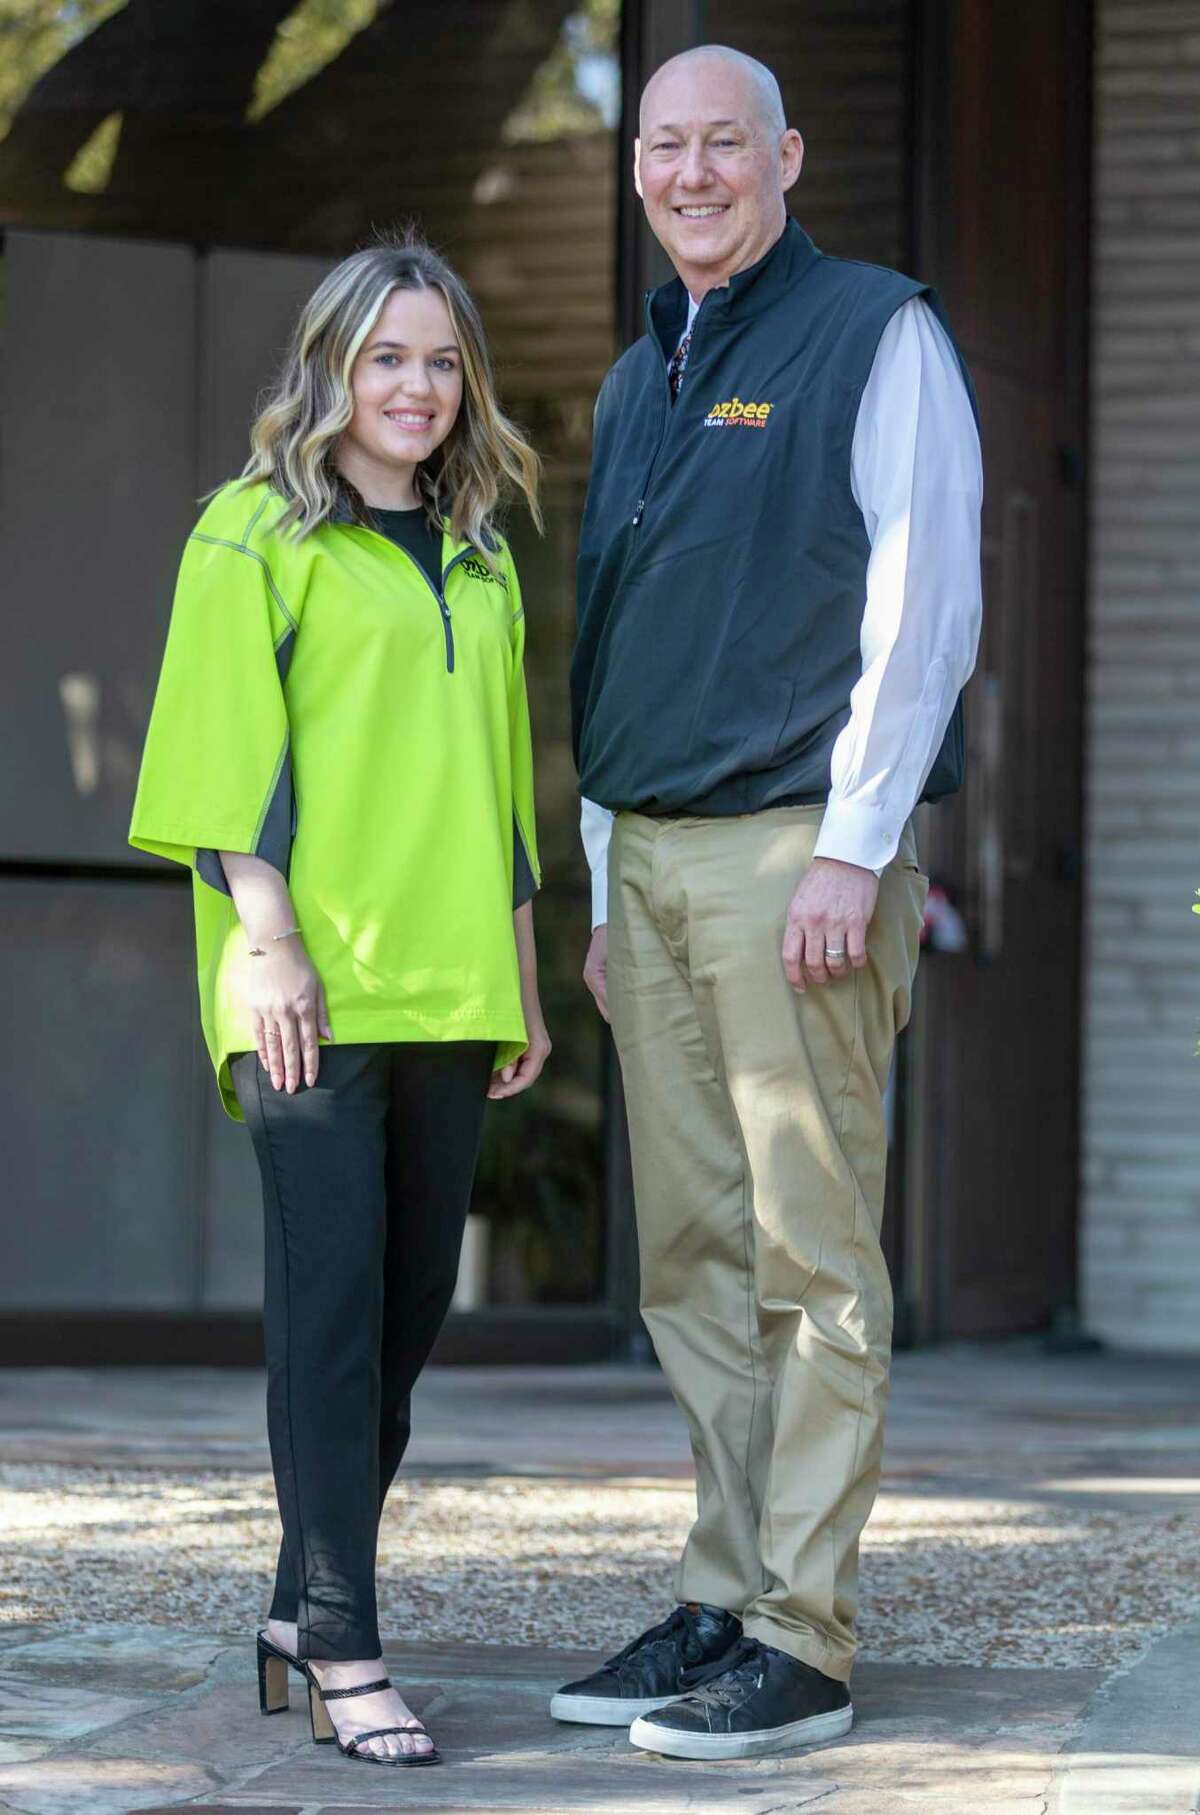 Jodi McCue and Brad Beldon pose Wednesday, Feb. 16, 2022 outside the Beldon corporate headquarters. The Beldon companies recently launched Ozbee Team Software, a construction software platform built on the Salesforce CRM services, with McCue as the Vice President of customer experience and Beldon as the CEO.